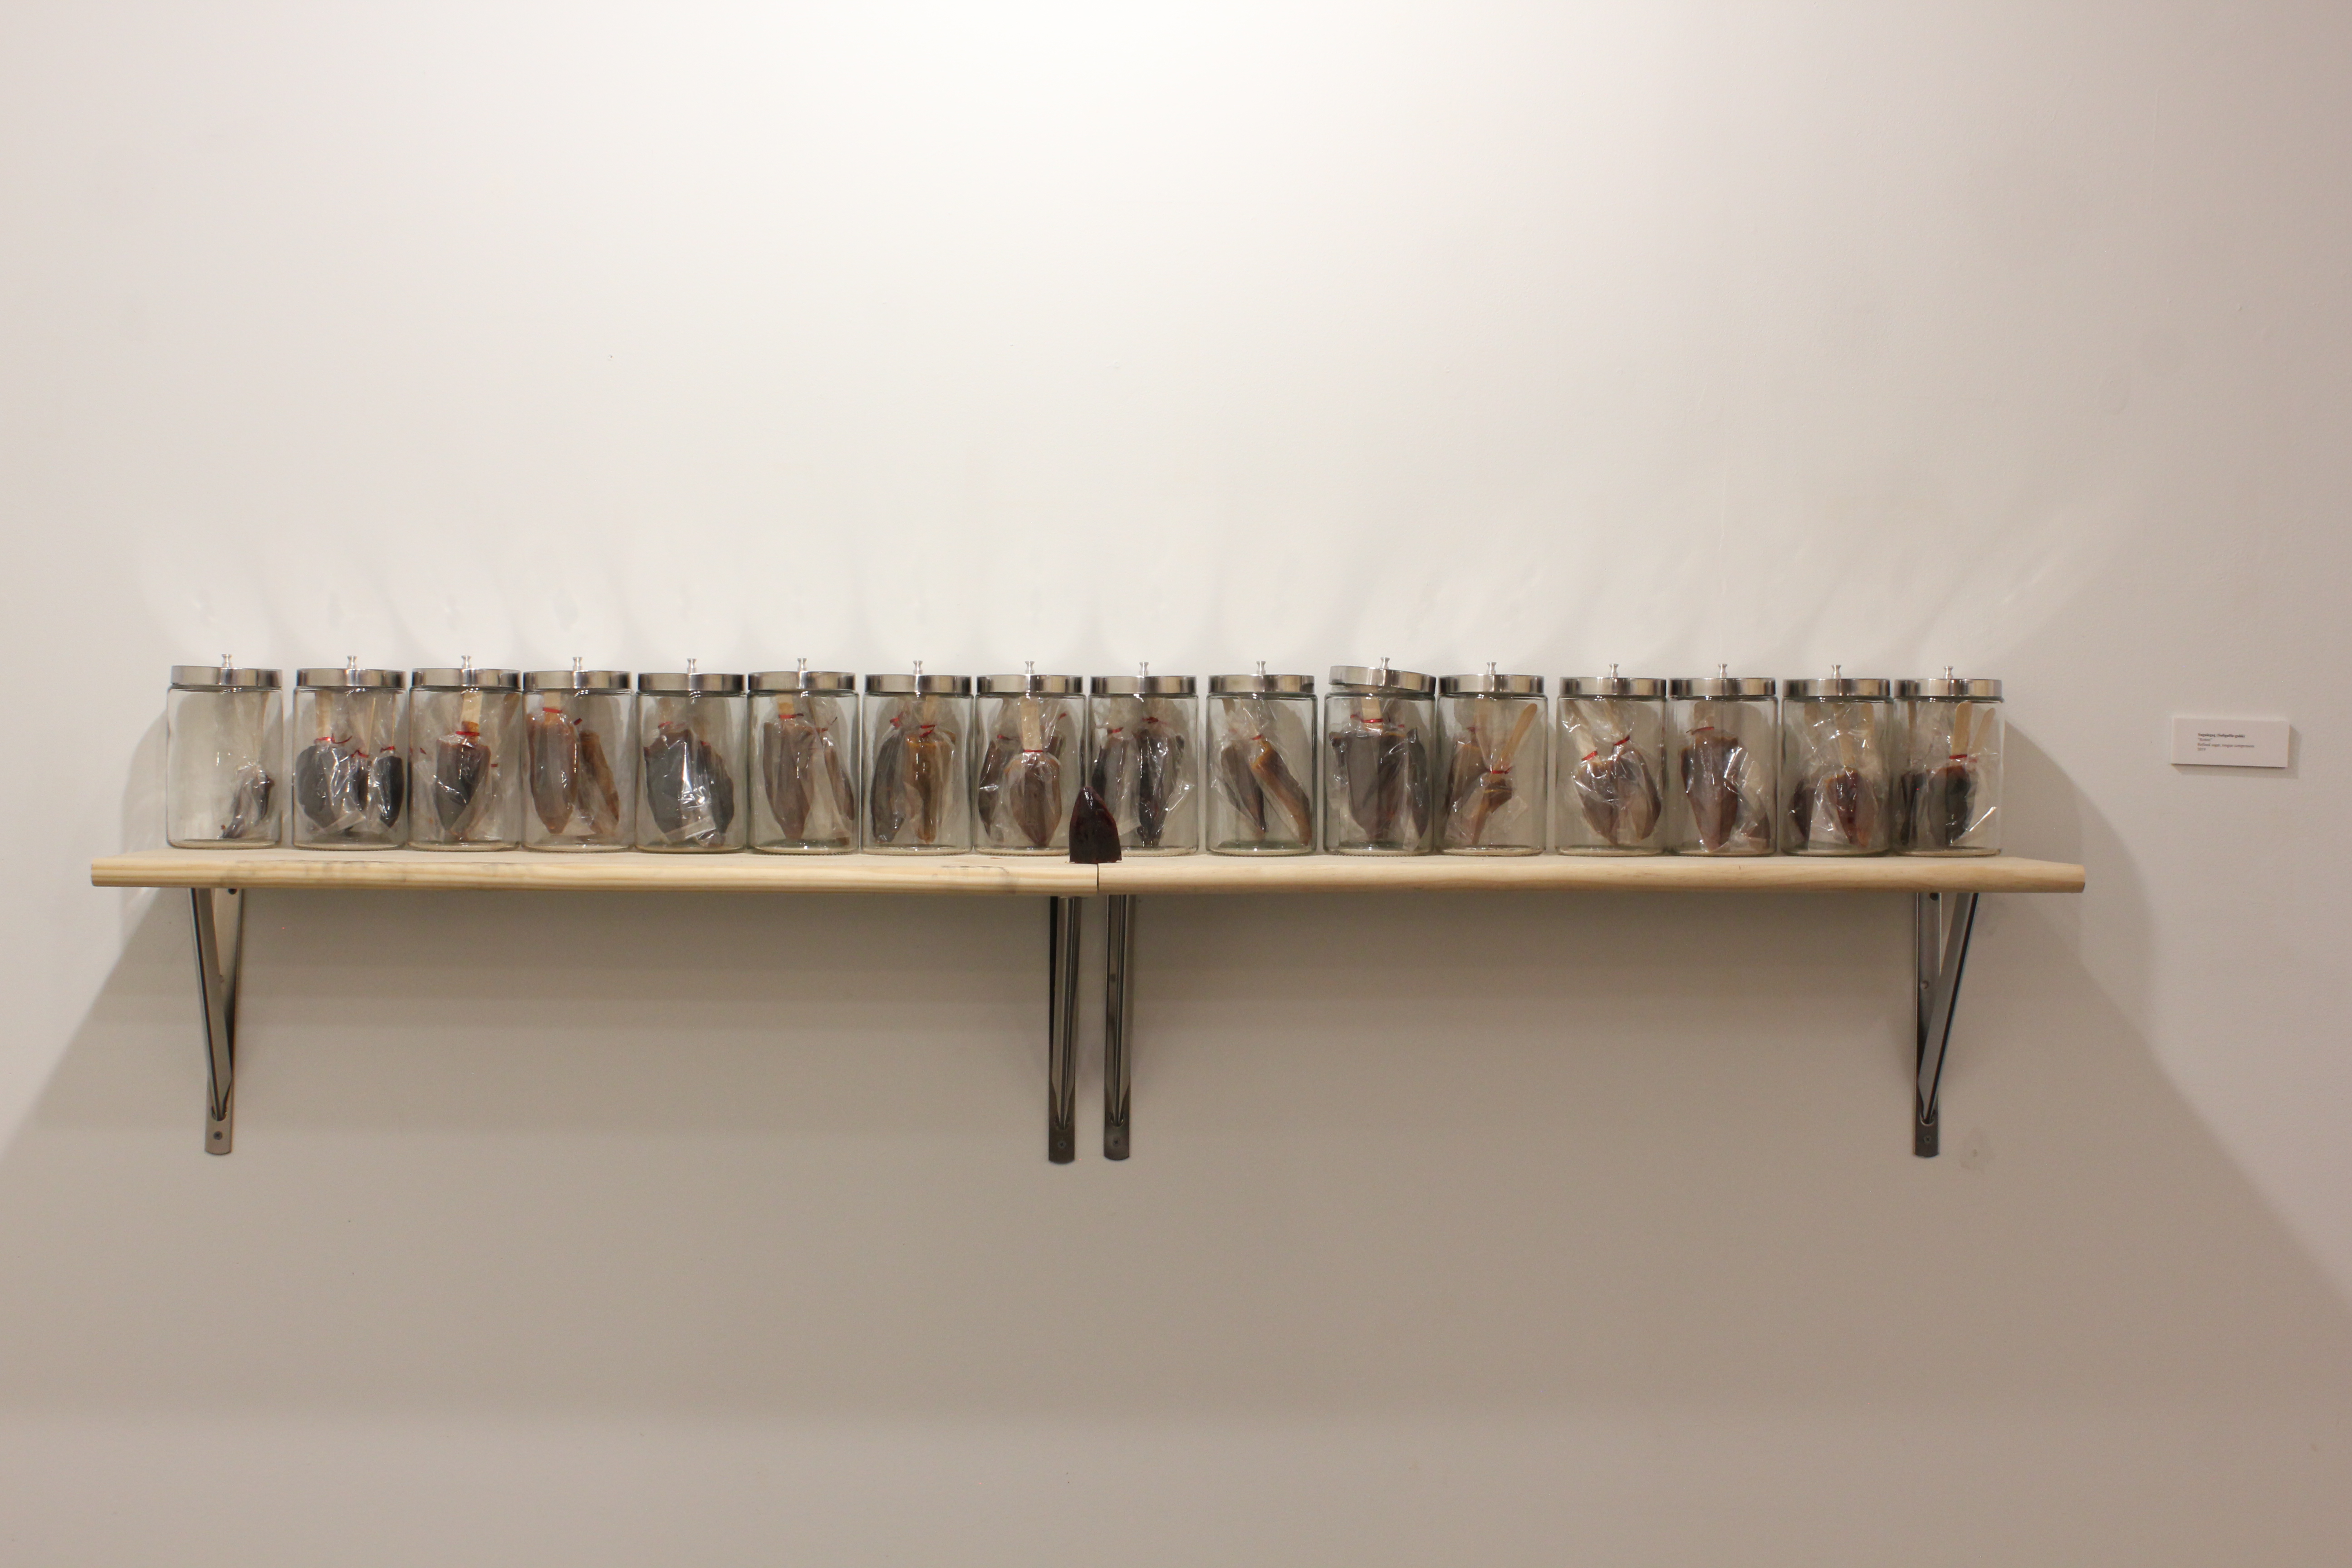 Artwork by Julia Rose Sutherland, Sugulegag "Rotten", 2019, refined sugar, tongue compressors, glass jars, 10” x 72” x 6”. Image courtesy of the artist. Works in glass jars, on a wooden shelf, hung on a white wall. 